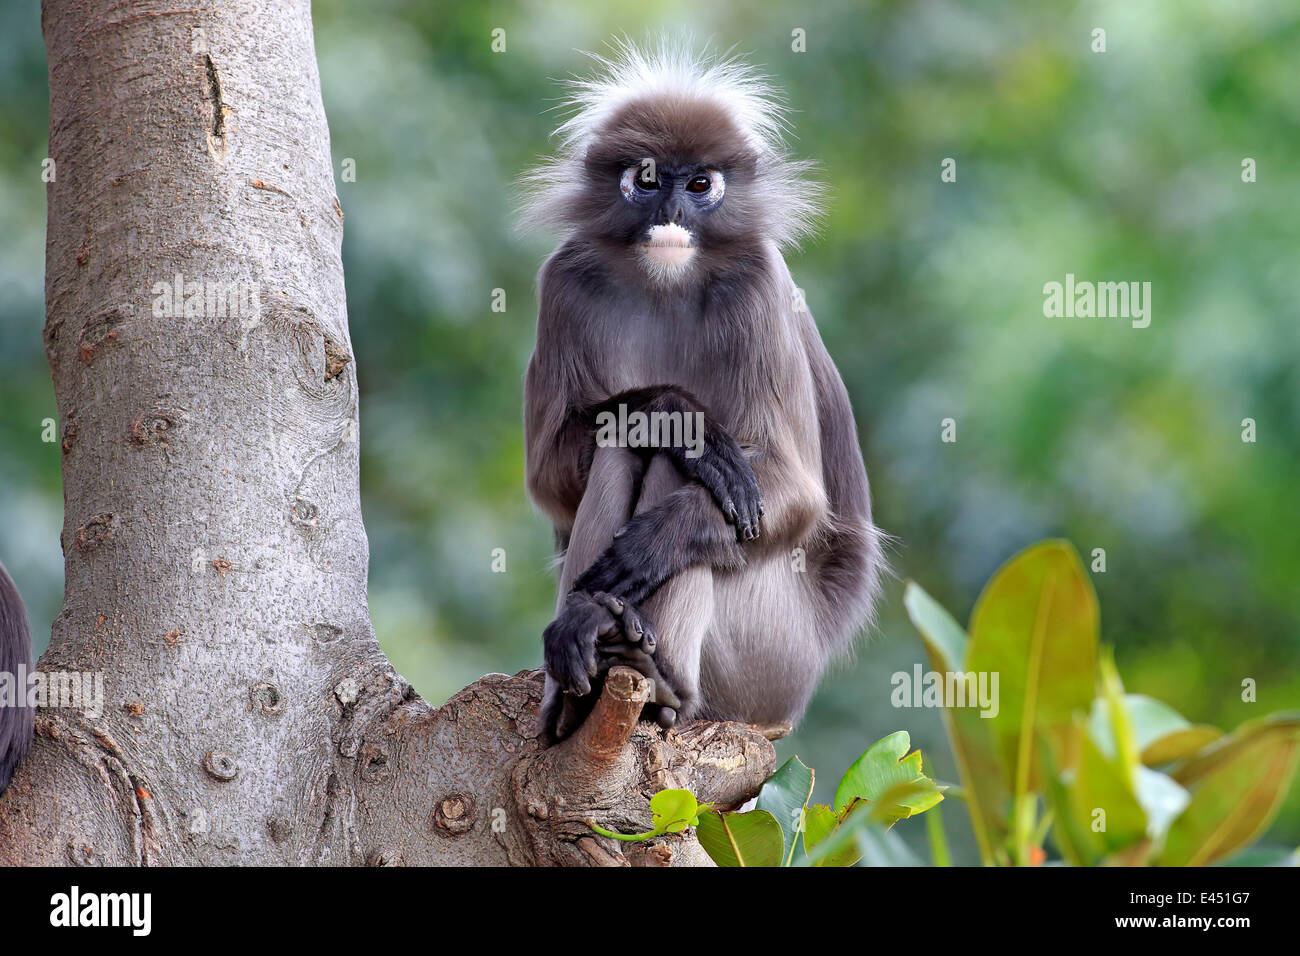 Dusky Leaf Monkey or Spectacled Langur (Trachypithecus obscurus), adult on tree, native to Asia, Singapore Stock Photo